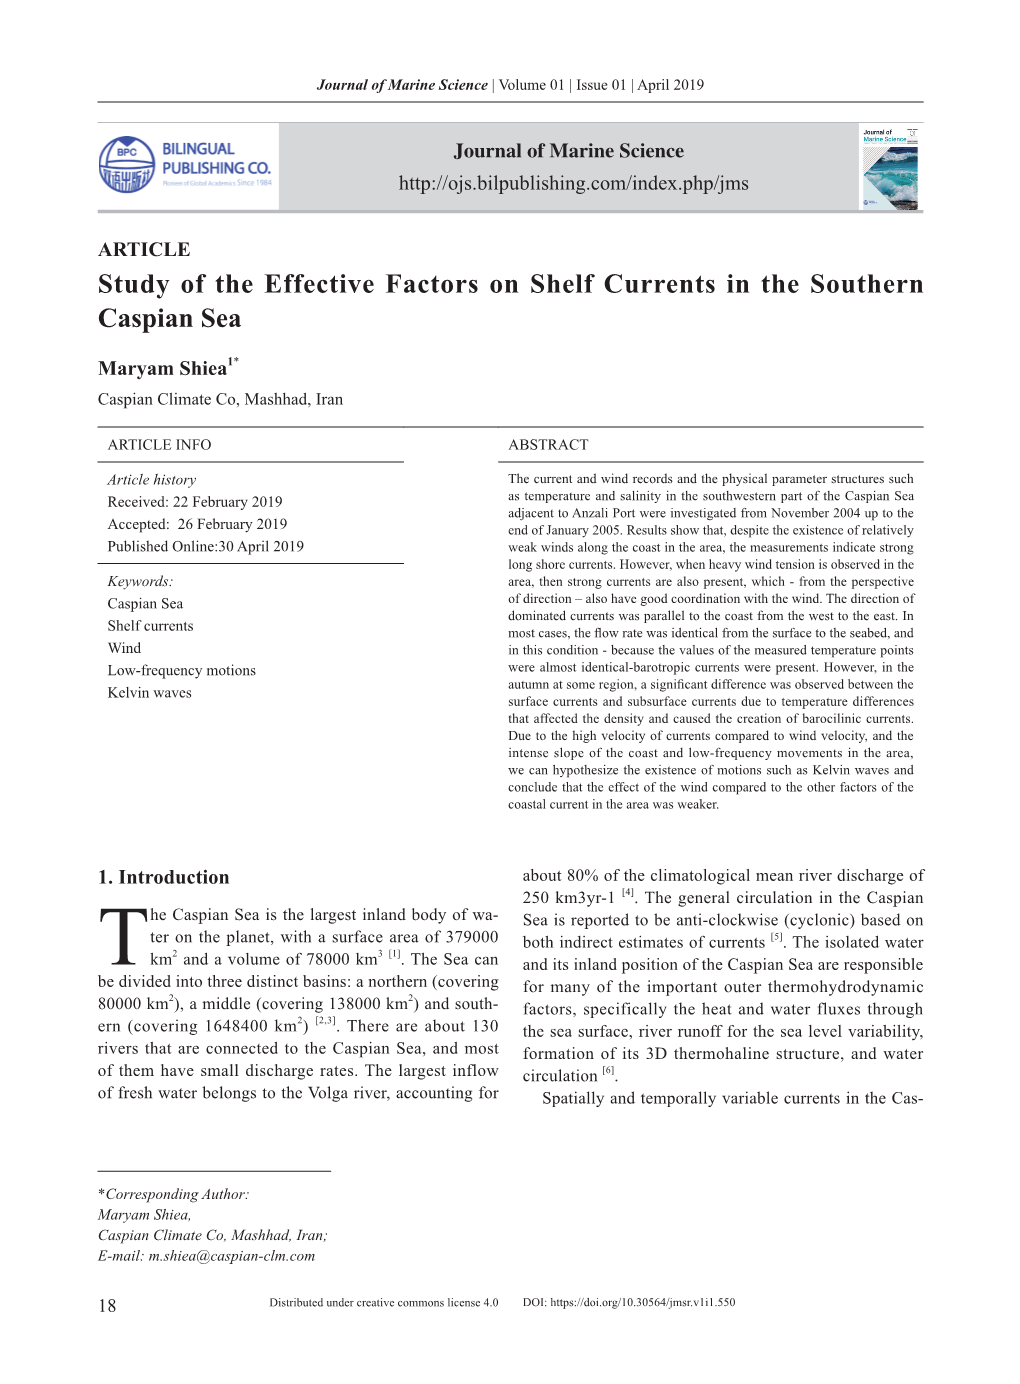 Study of the Effective Factors on Shelf Currents in the Southern Caspian Sea